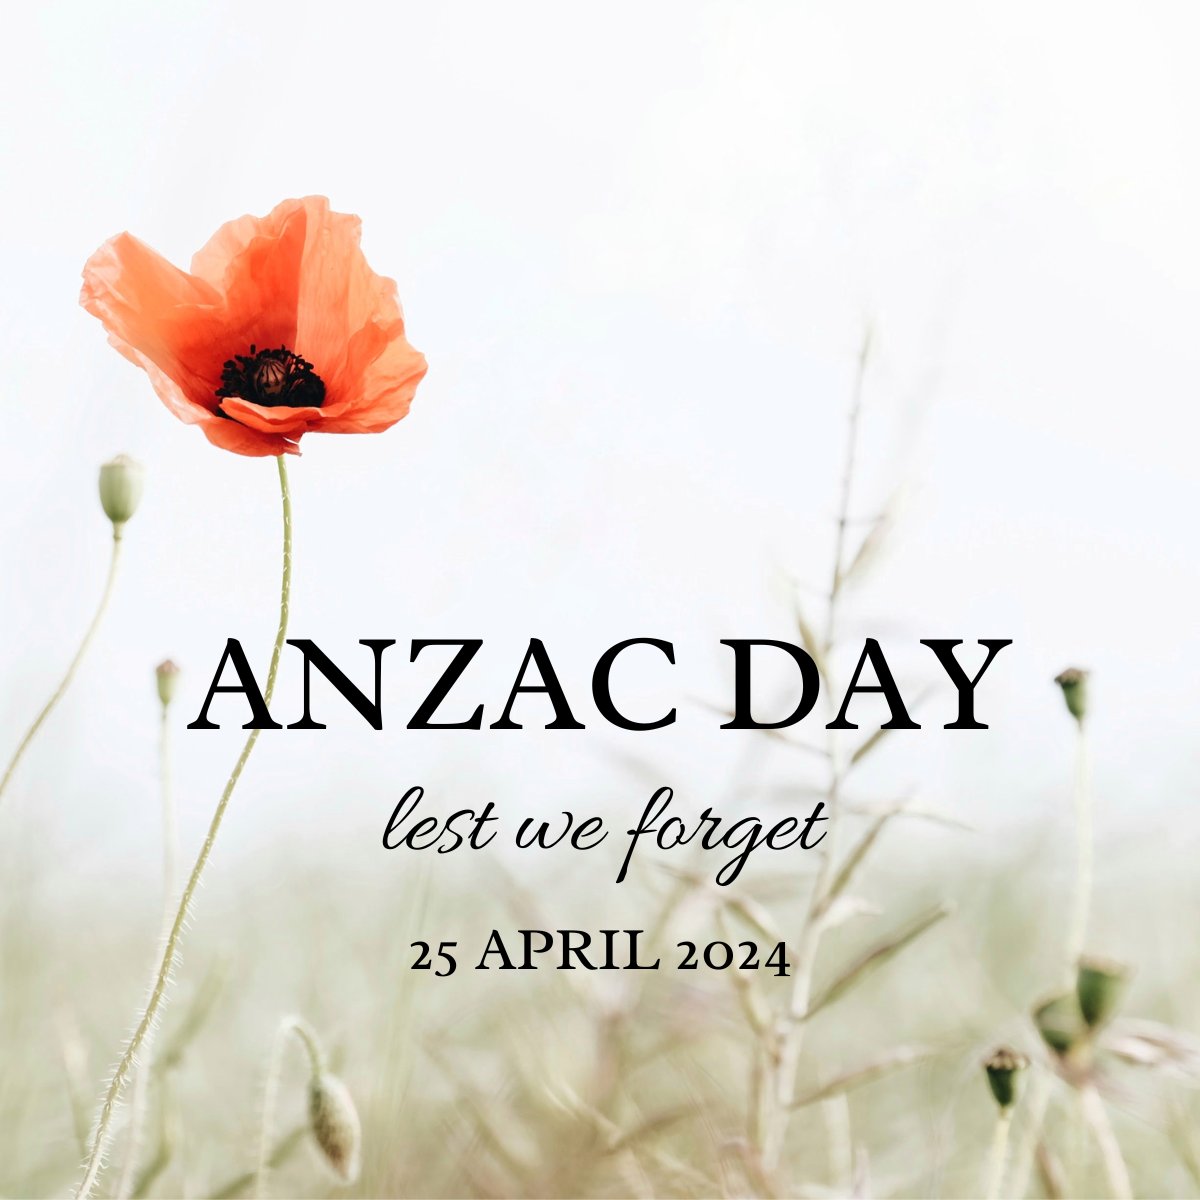 On this Anzac Day, across Aotearoa NZ and Australia, we pay tribute to past and current service personnel who have served, acknowledging their dedication and sacrifice. Lest we forget.